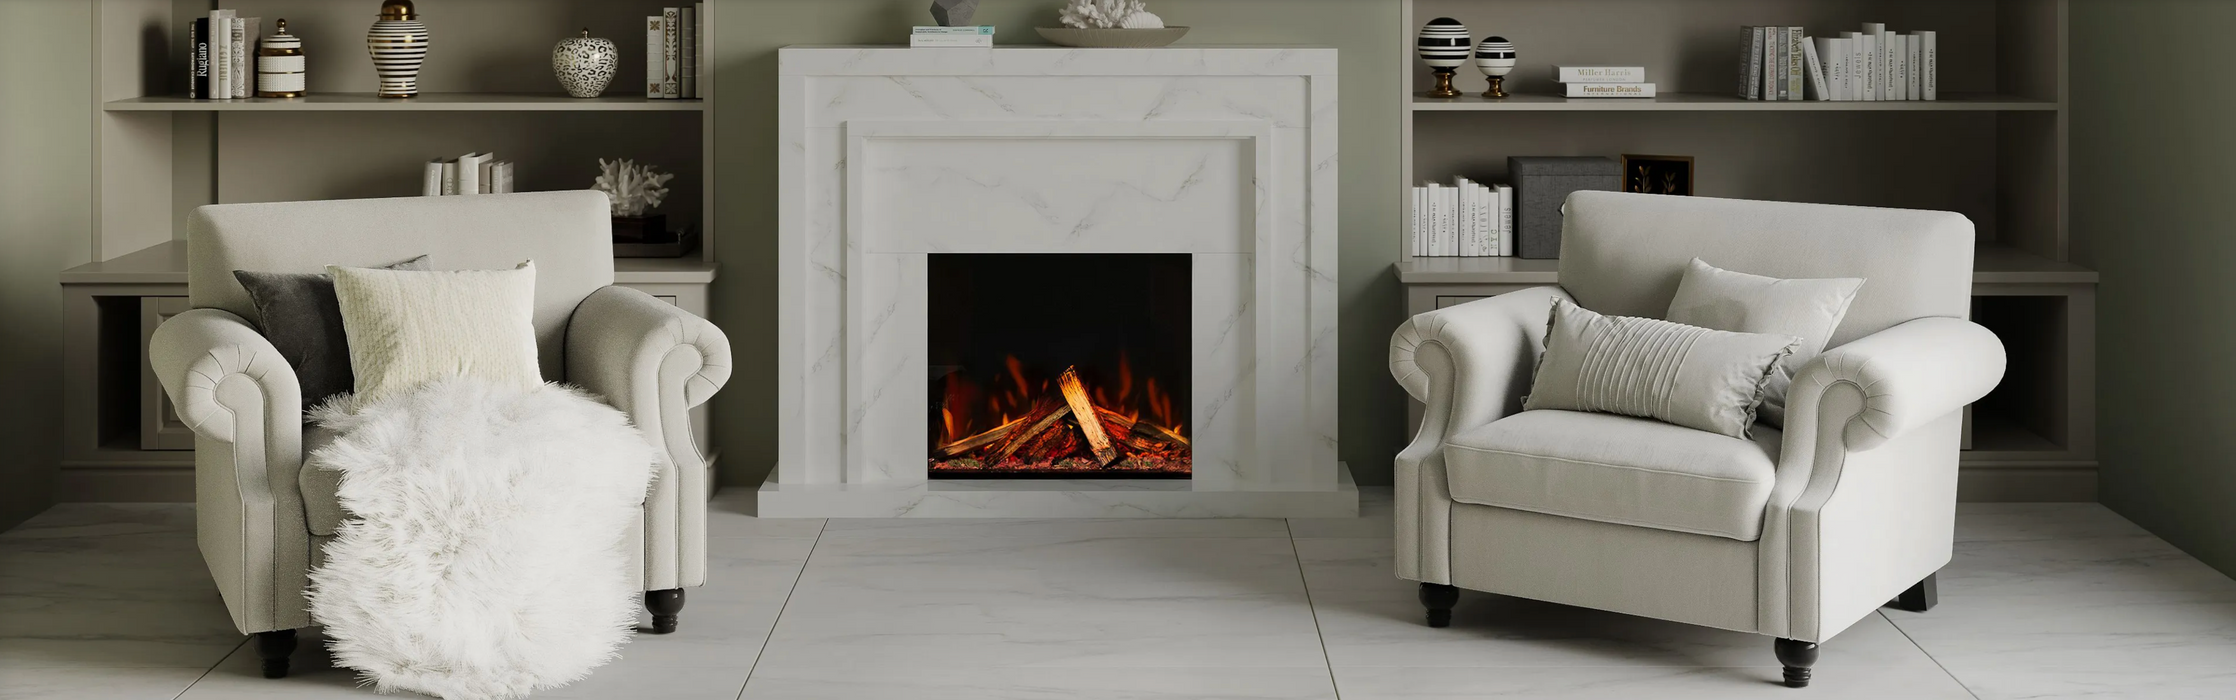 Bespoke Fireplaces Zenith 700 S Marble Suite